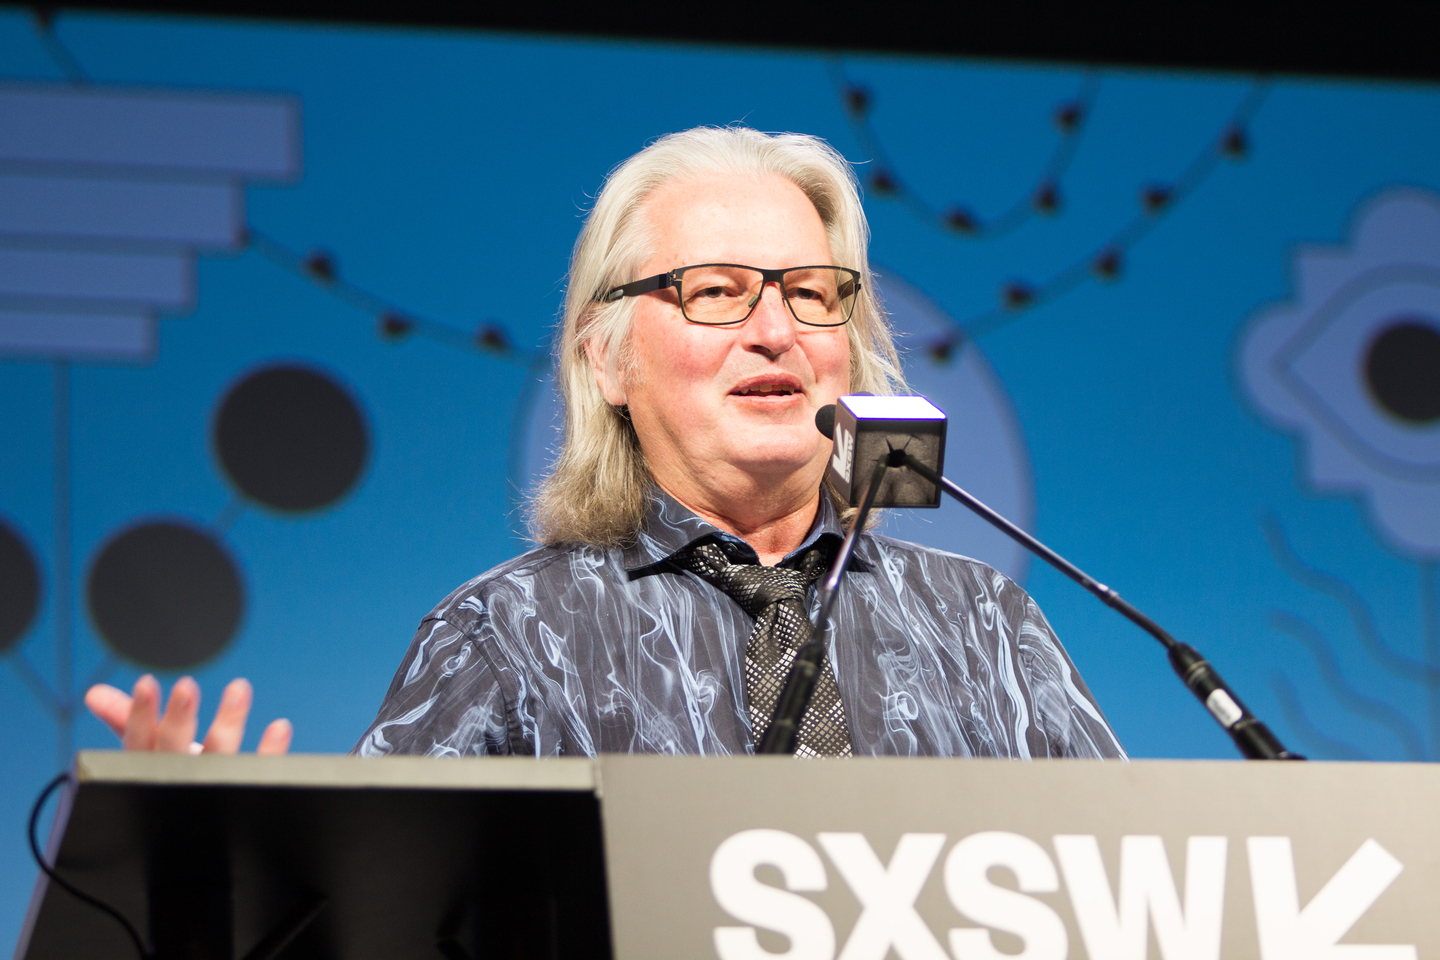 Bruce Sterling at his Featured Session – Photo by Adrianne Schroeder